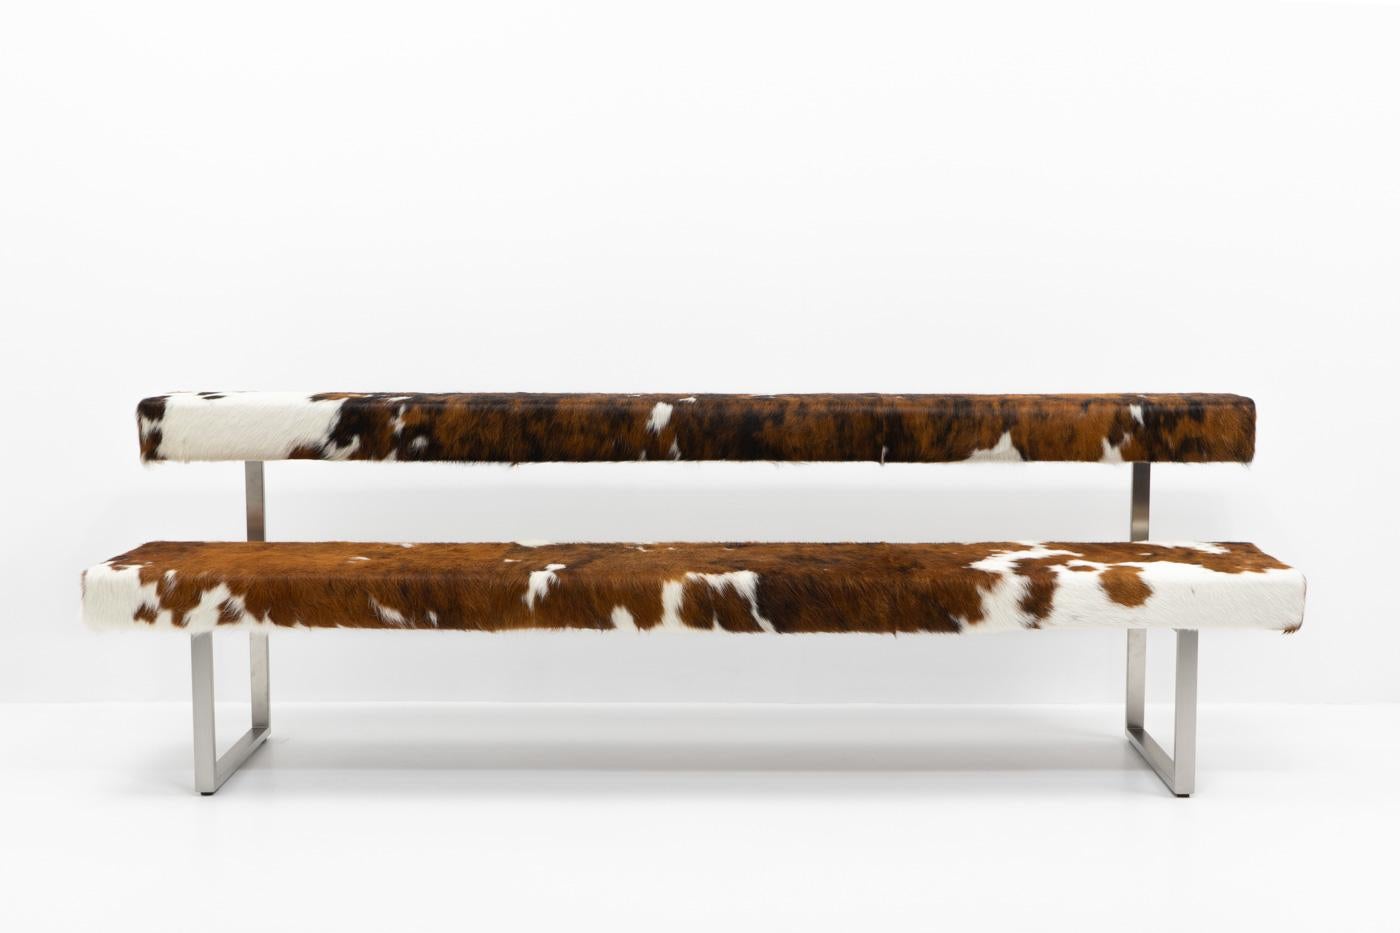 Contemporary Swiss Design Permesso Bench in cowhide, by Girsberger - 2000s For Sale